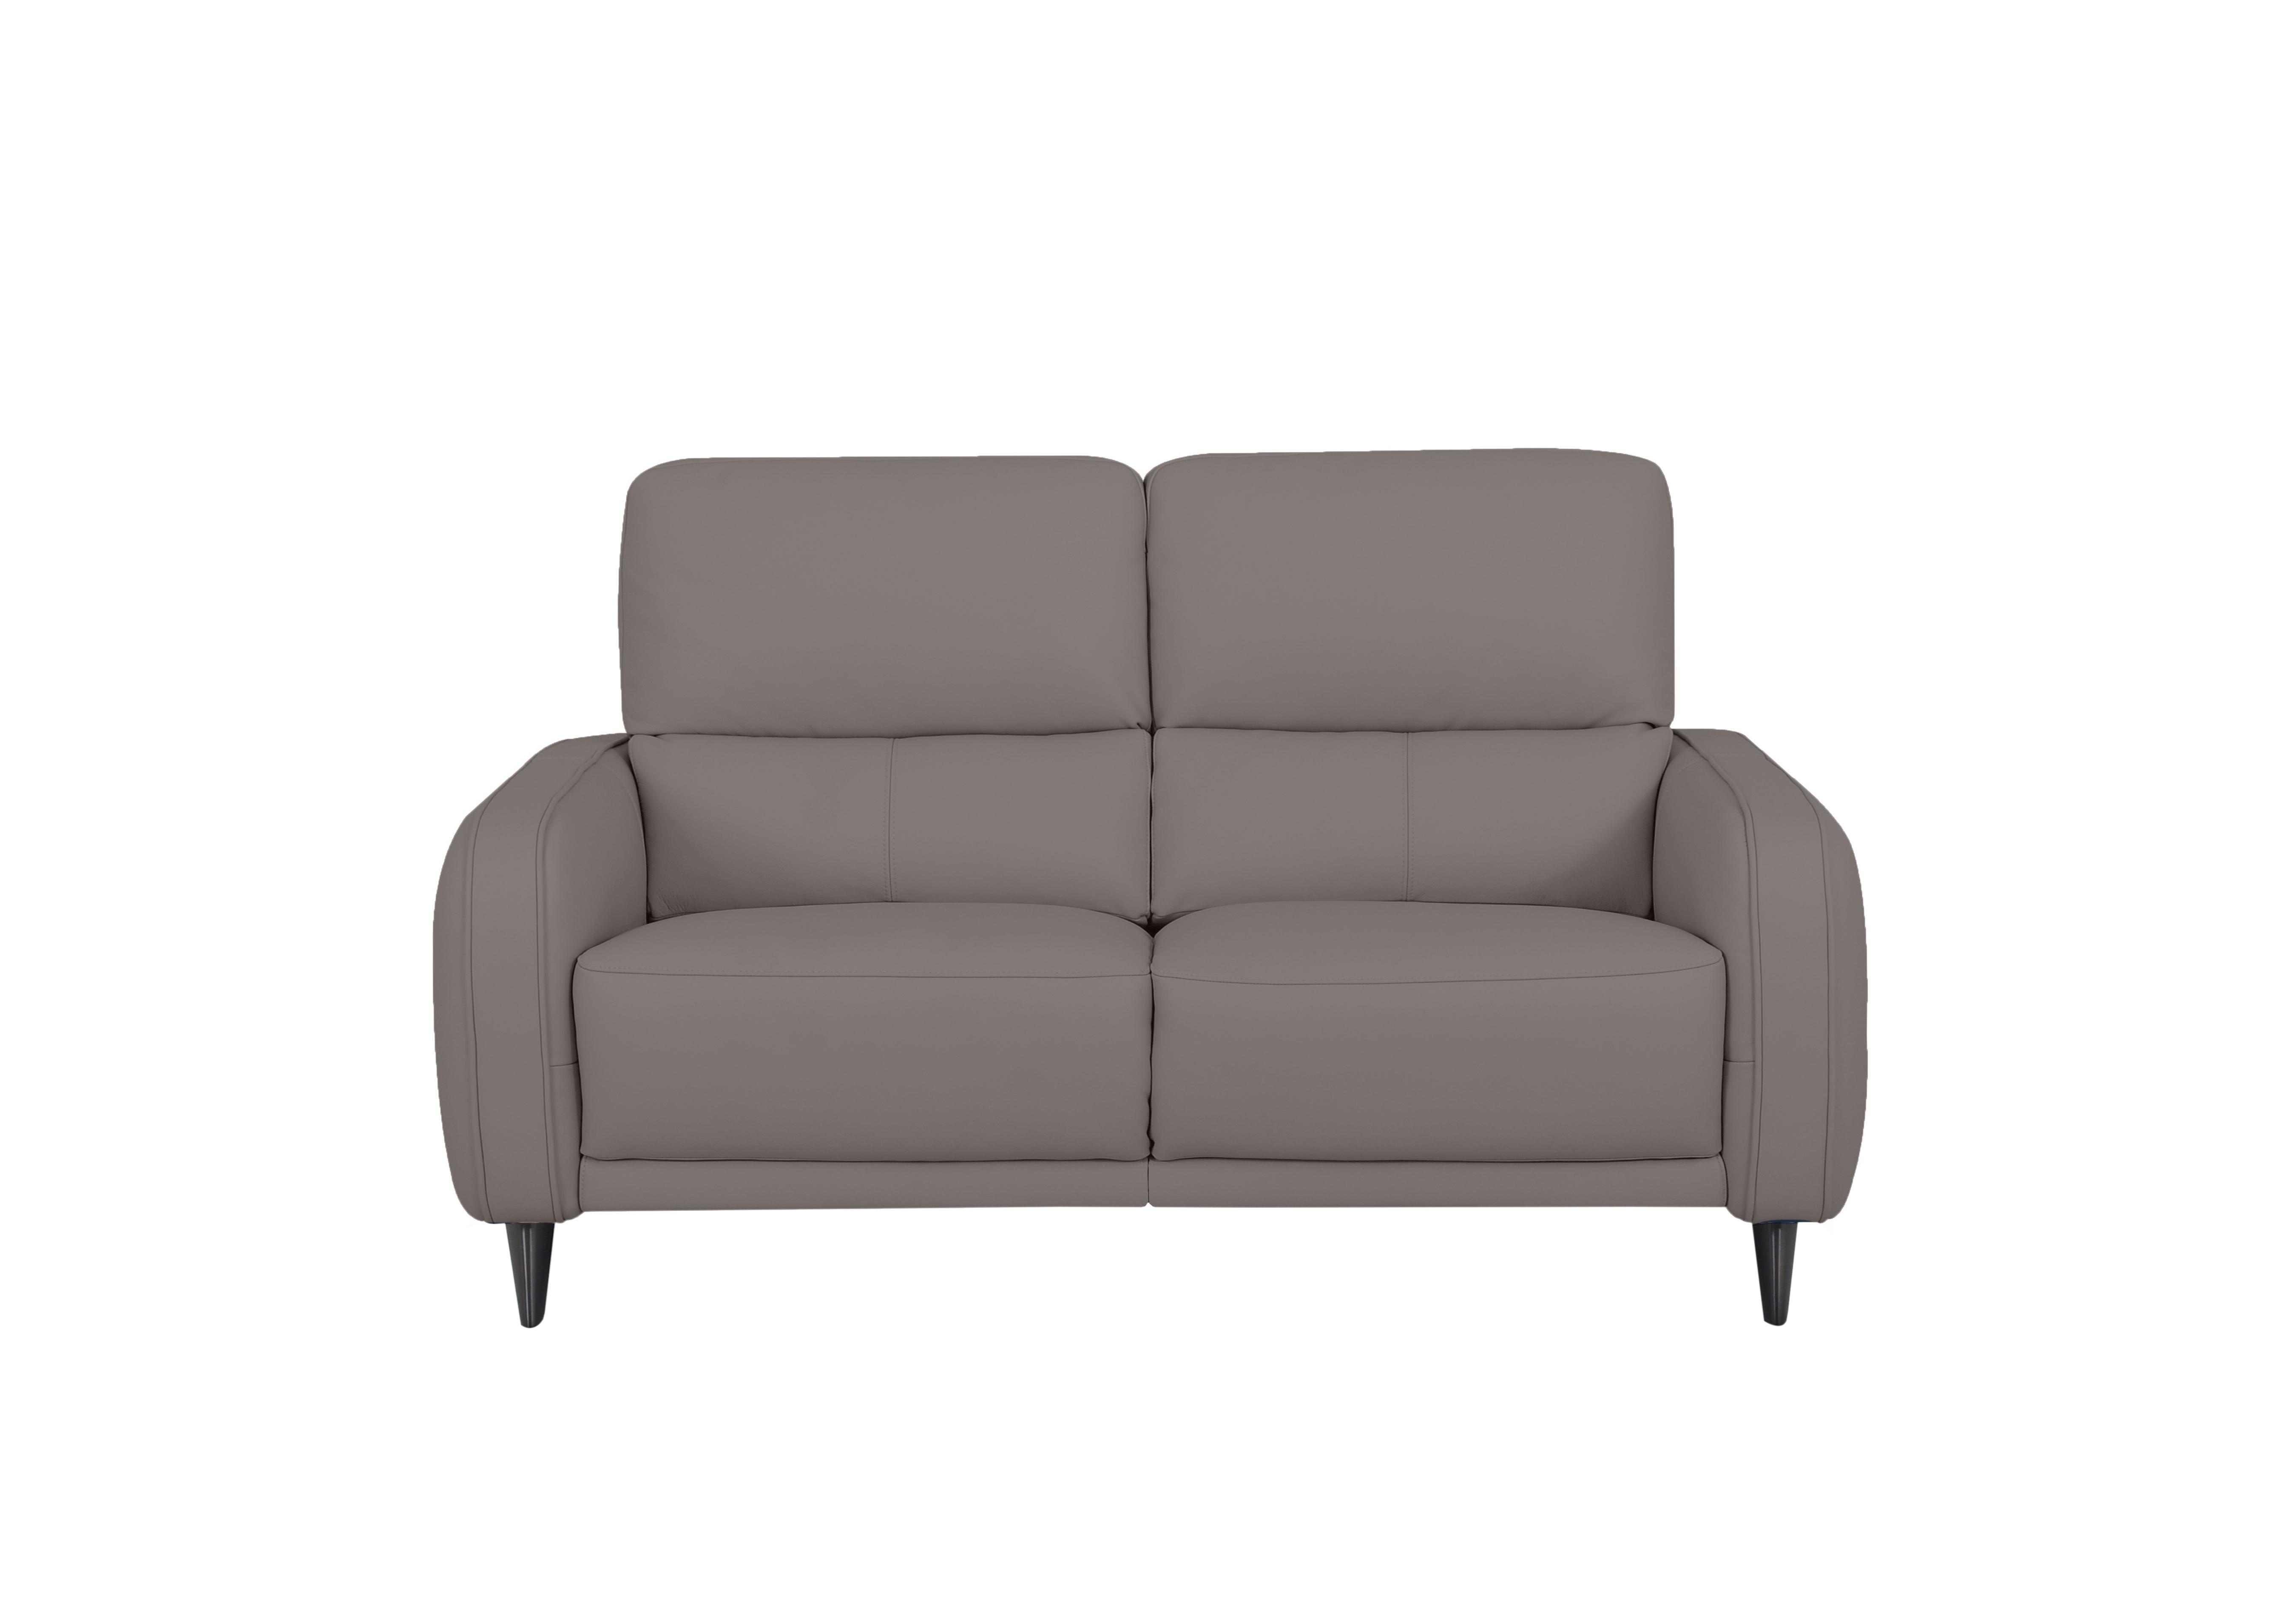 Logan 2.5 Seater Leather Sofa in Np-604e Taupe on Furniture Village